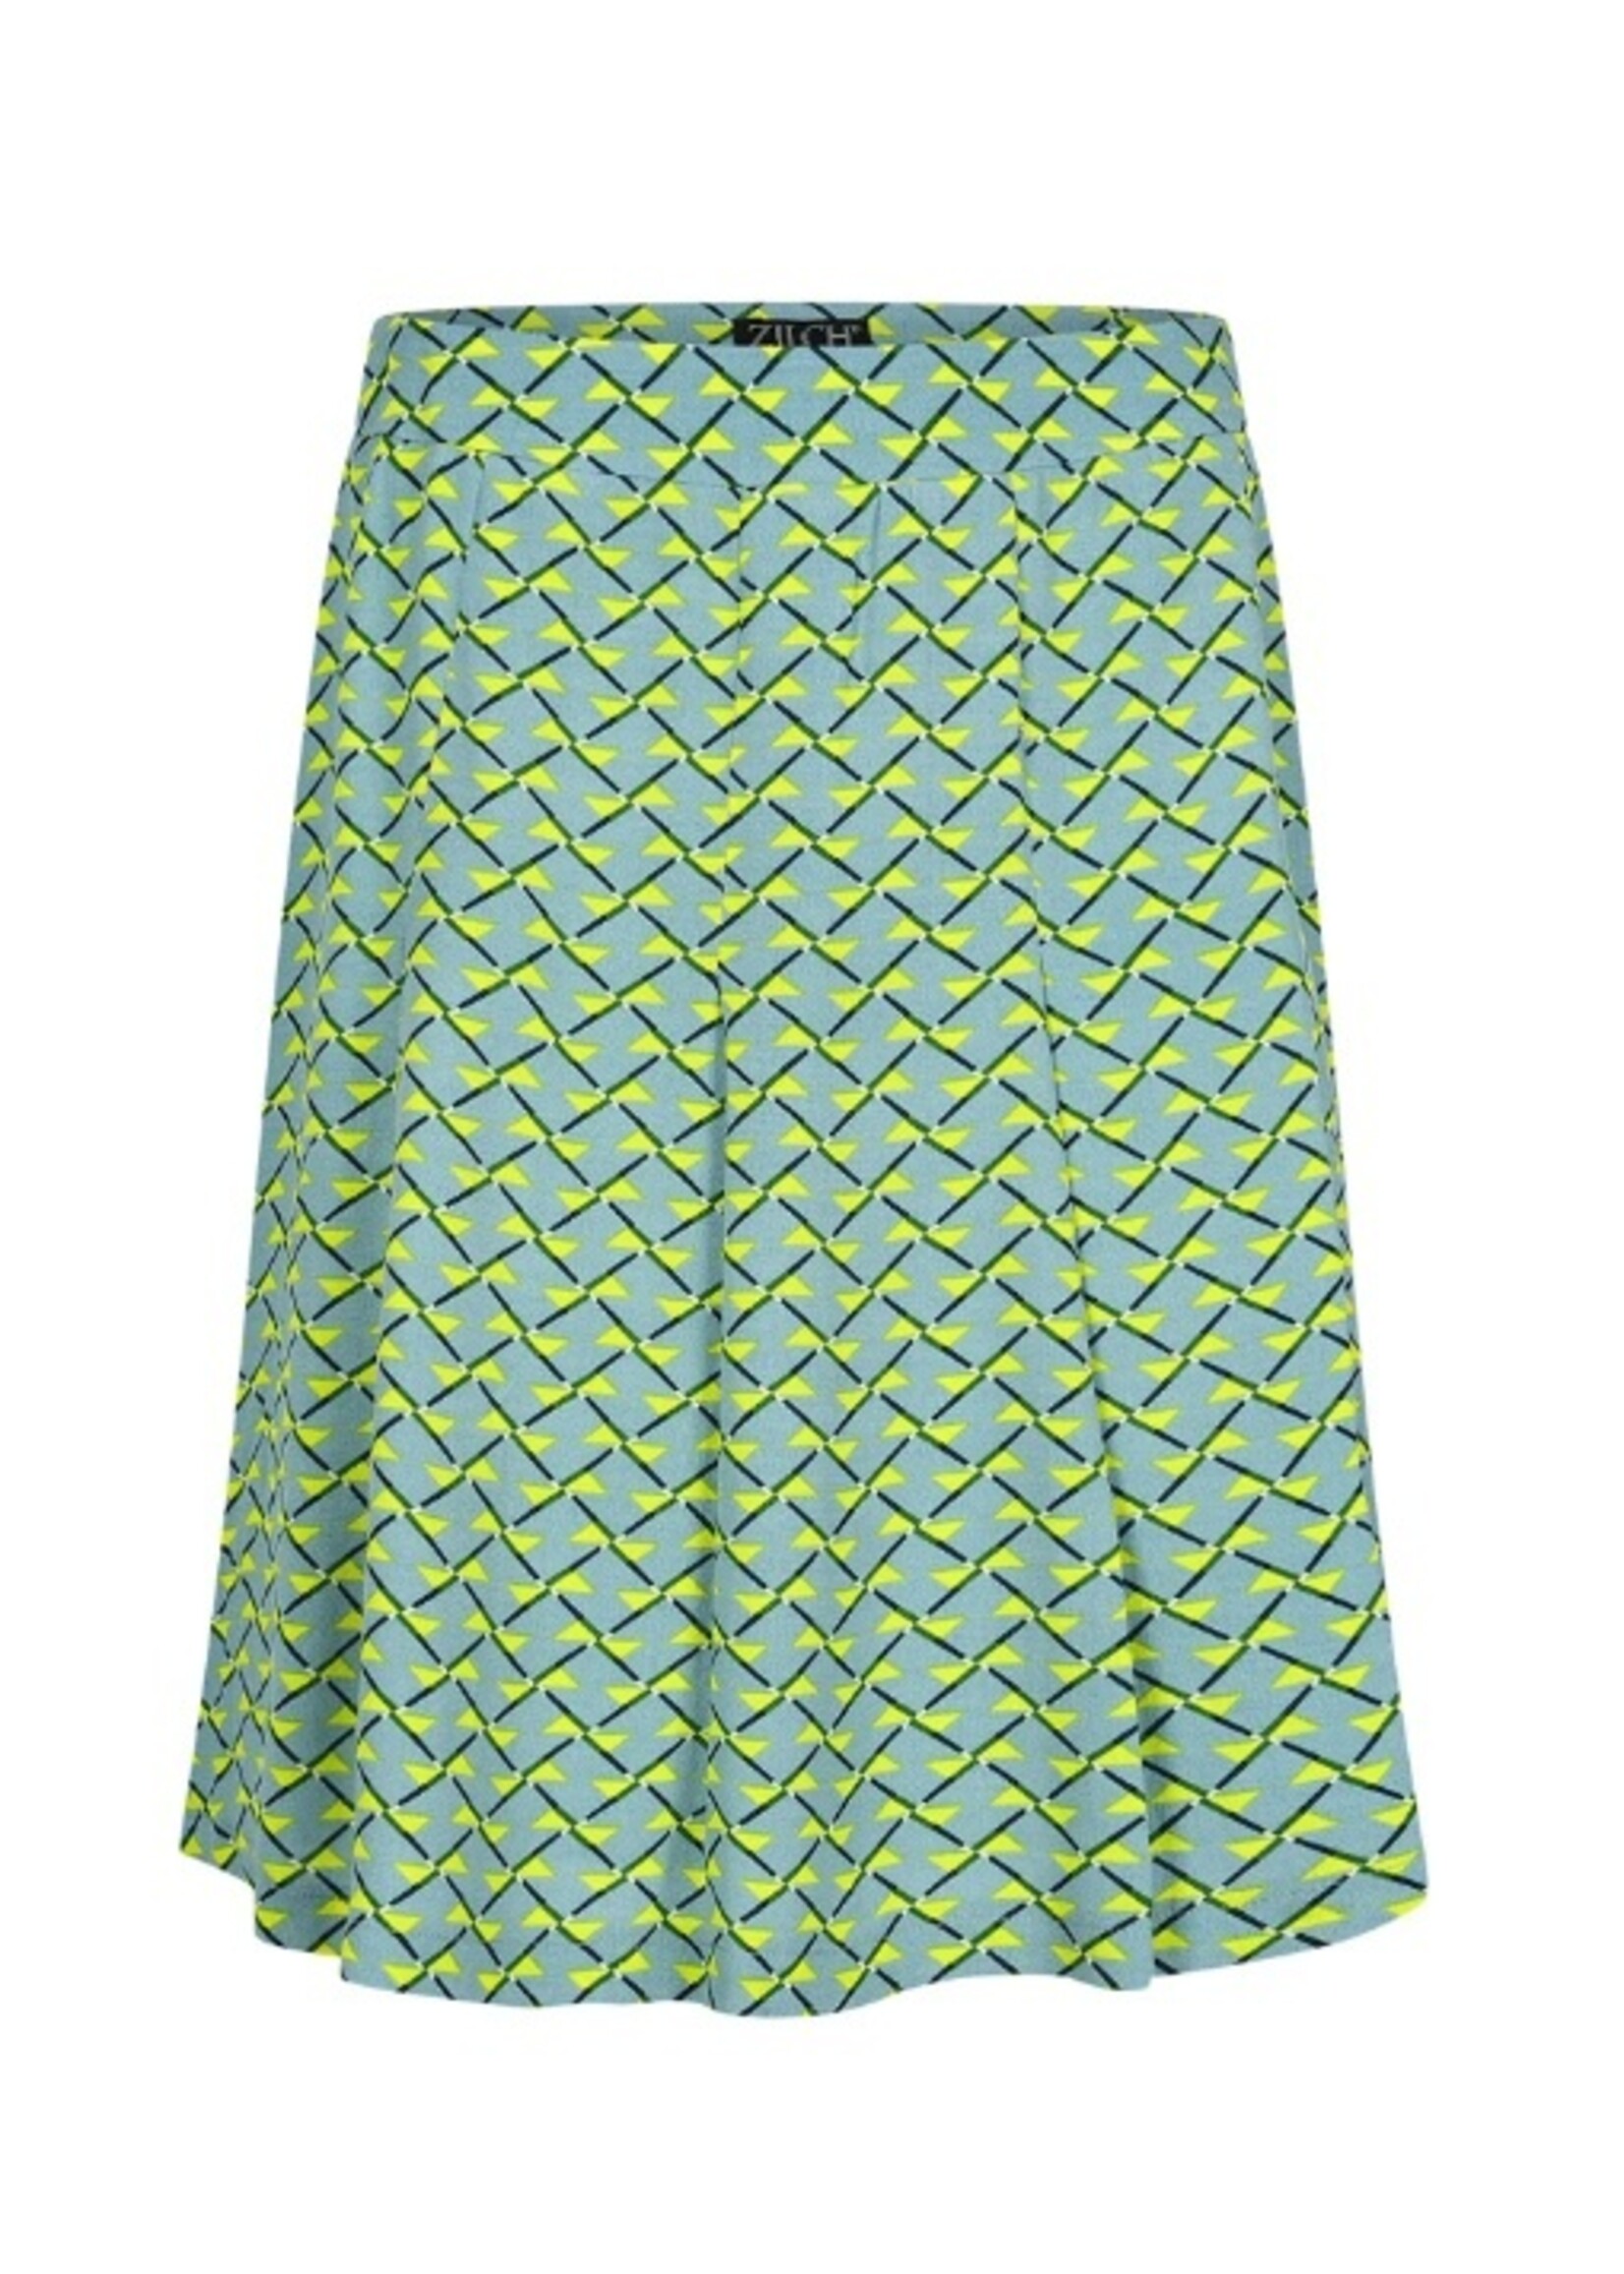 ZILCH ZILCH SKIRT PLEATS 41VCR50.091P